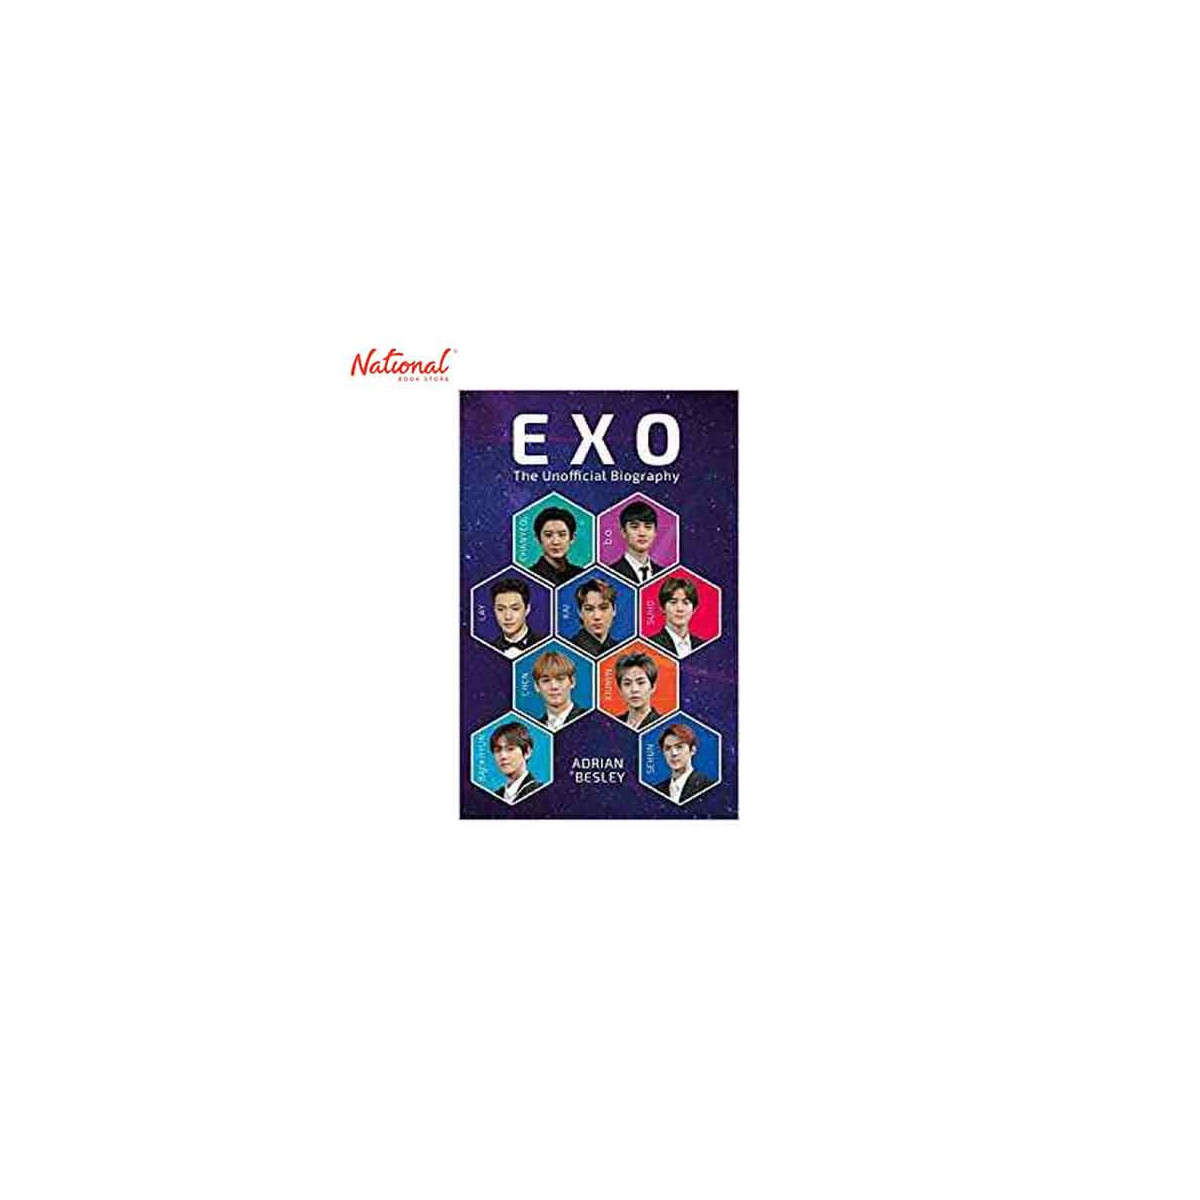 EXO: THE UNFFICIAL BIOGRAPHY